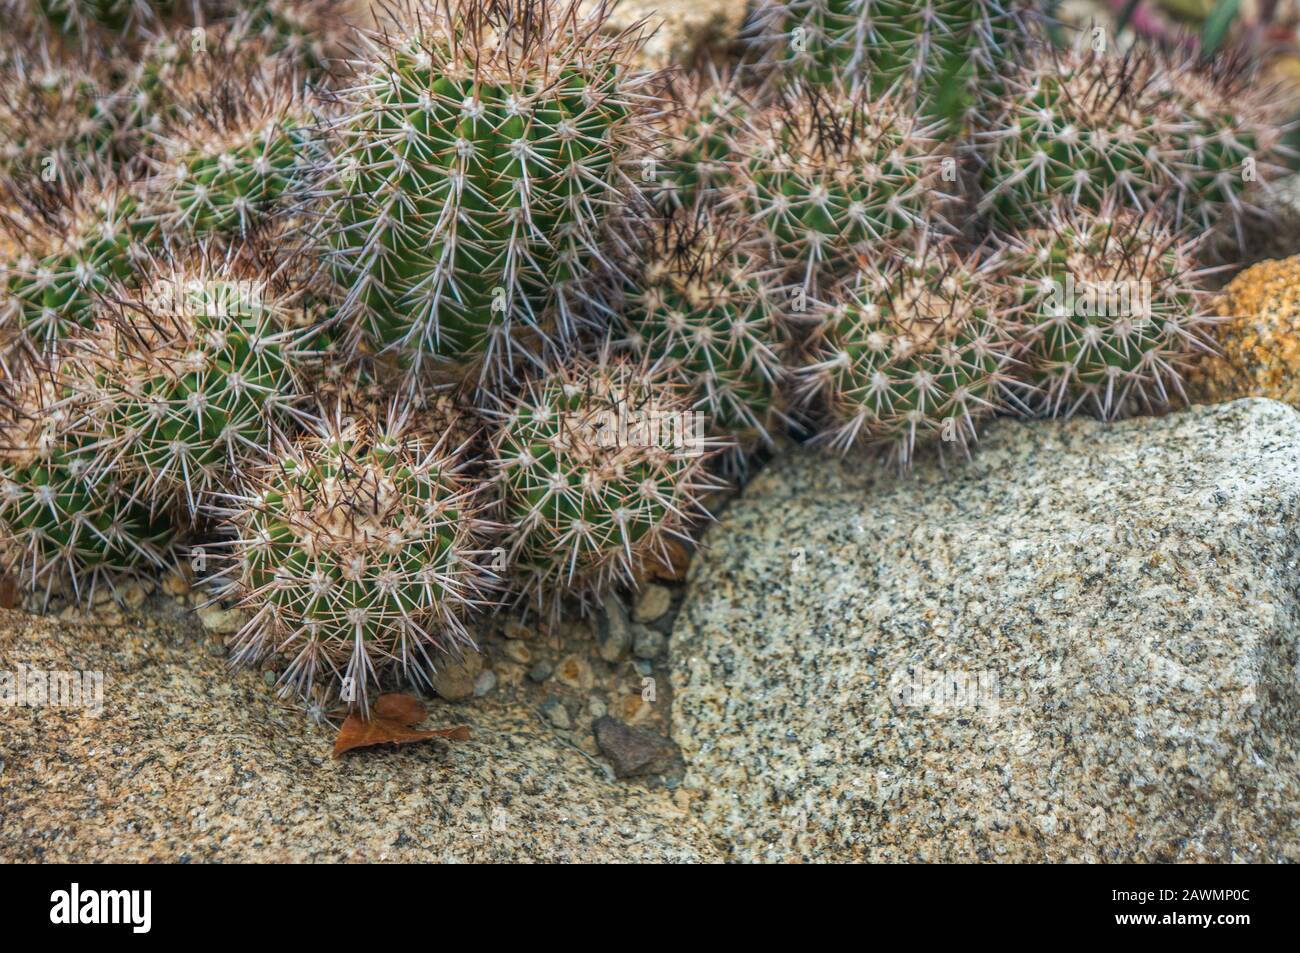 Group of dark green 'copiapoa echinata' cactus with gold needles and selective focus. Shot in natural light with marbled rocks as background Stock Photo